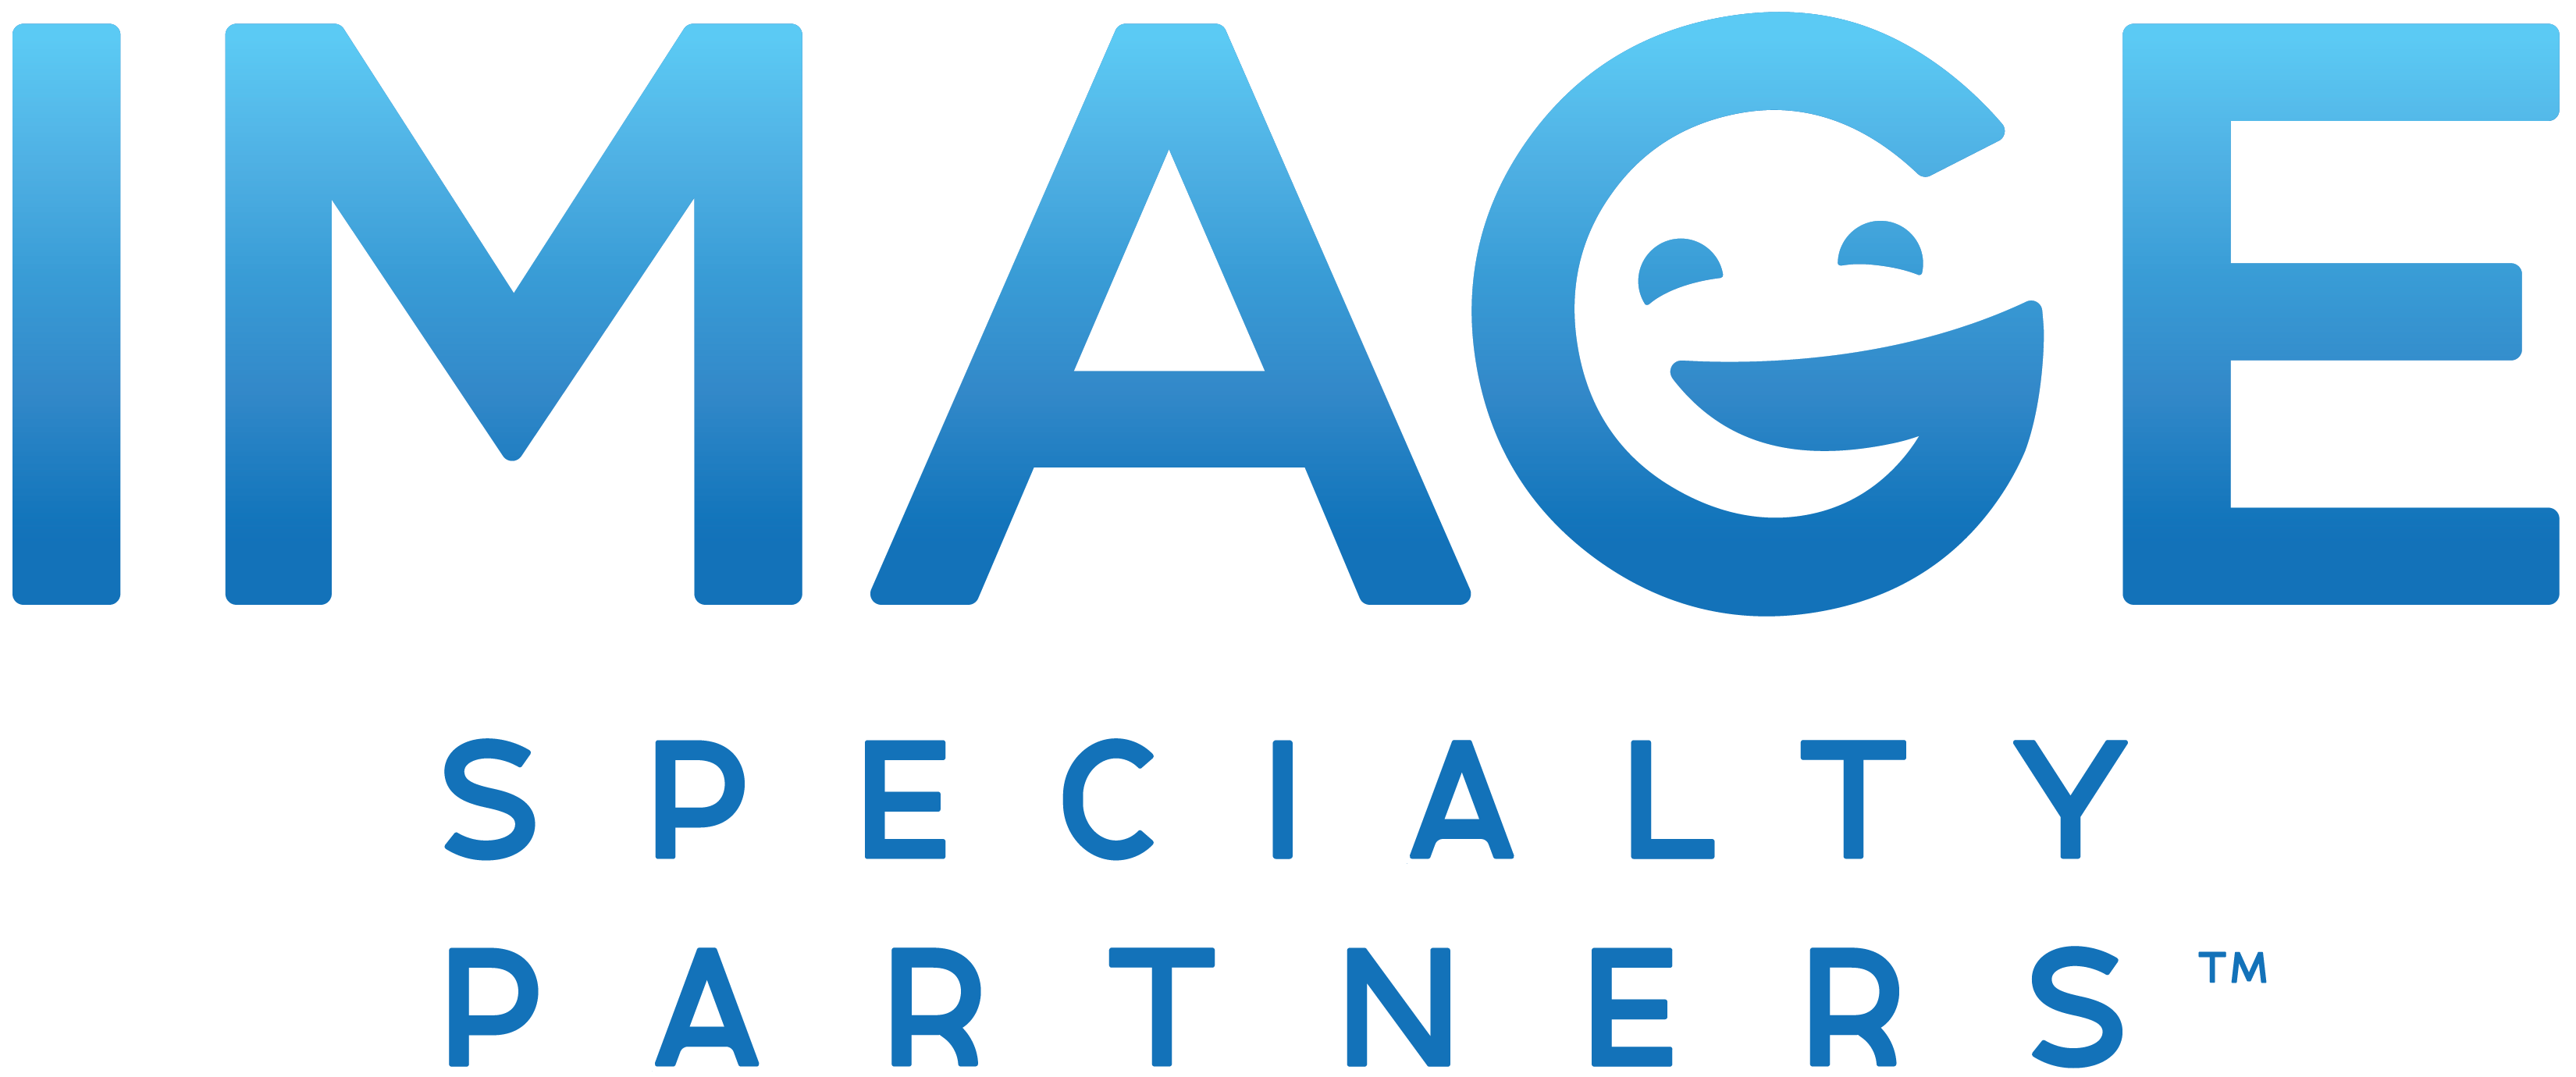 Image Specialty Partners™ Welcomes Southern California-Based Hulse Orthodontics to Its Dental Partnership Family